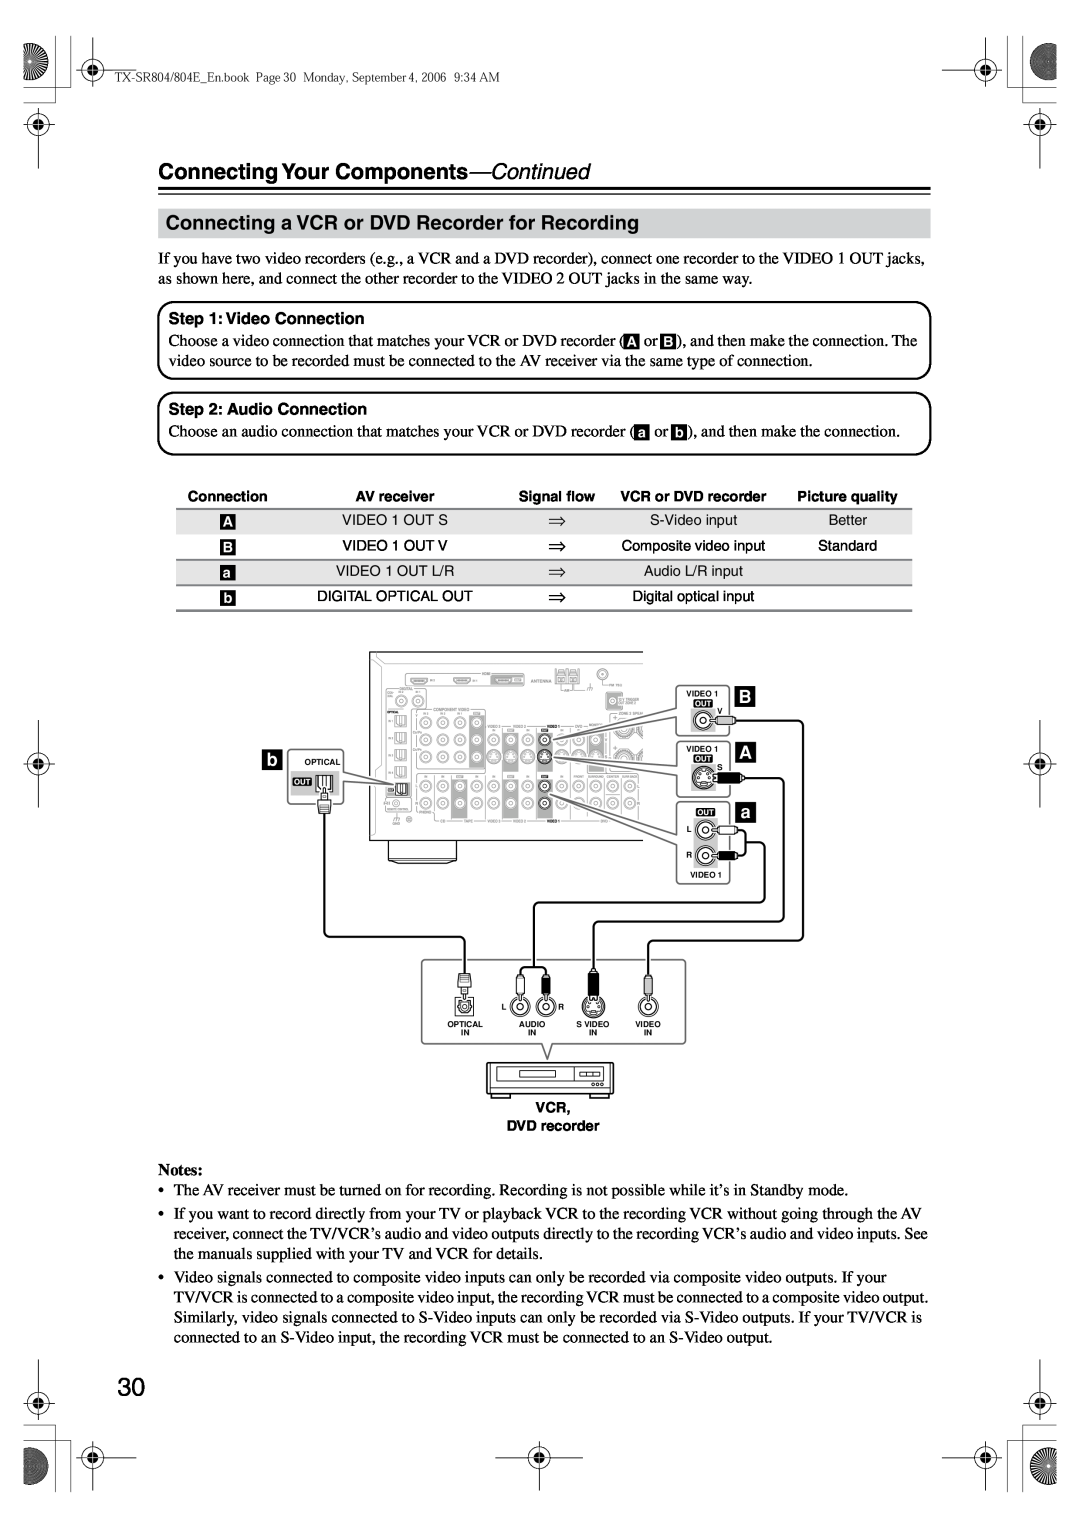 Onkyo TX-SR804E instruction manual Connecting a VCR or DVD Recorder for Recording, Connecting Your Components—Continued 